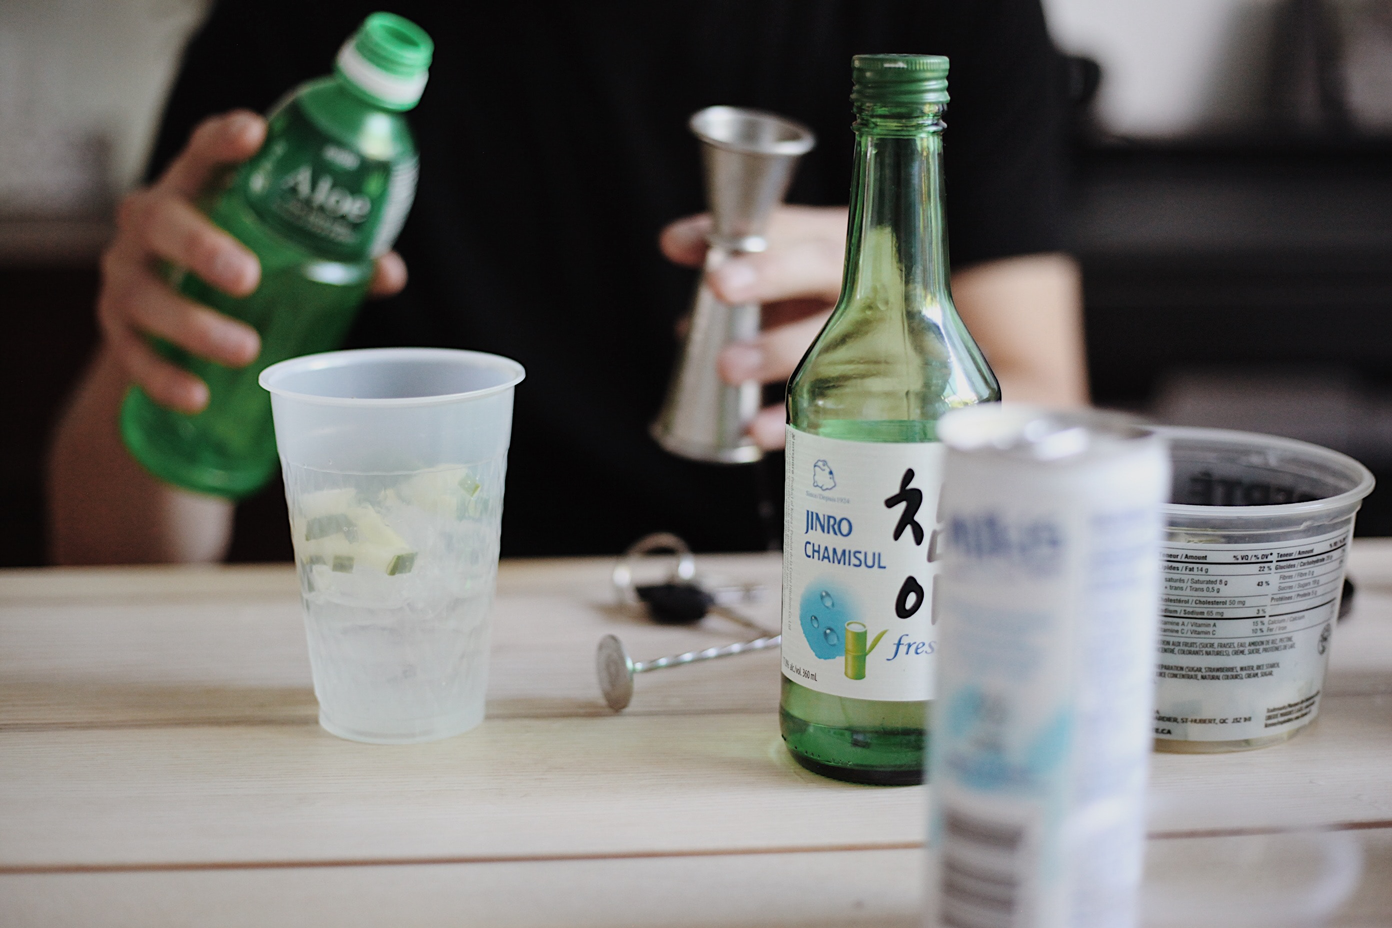 What is Sake? Is it Different from Soju?